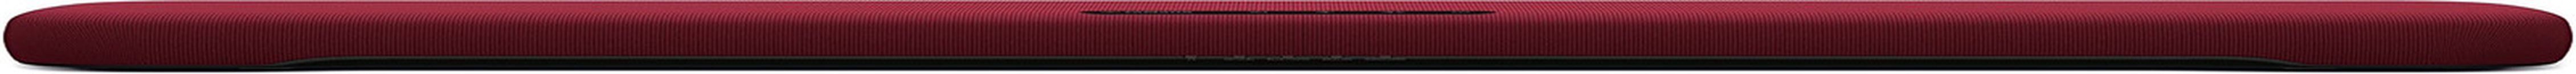 Yamaha SR-C20A Compact Soundbar with Built-In Subwoofer, Bluetooth and Clear ...